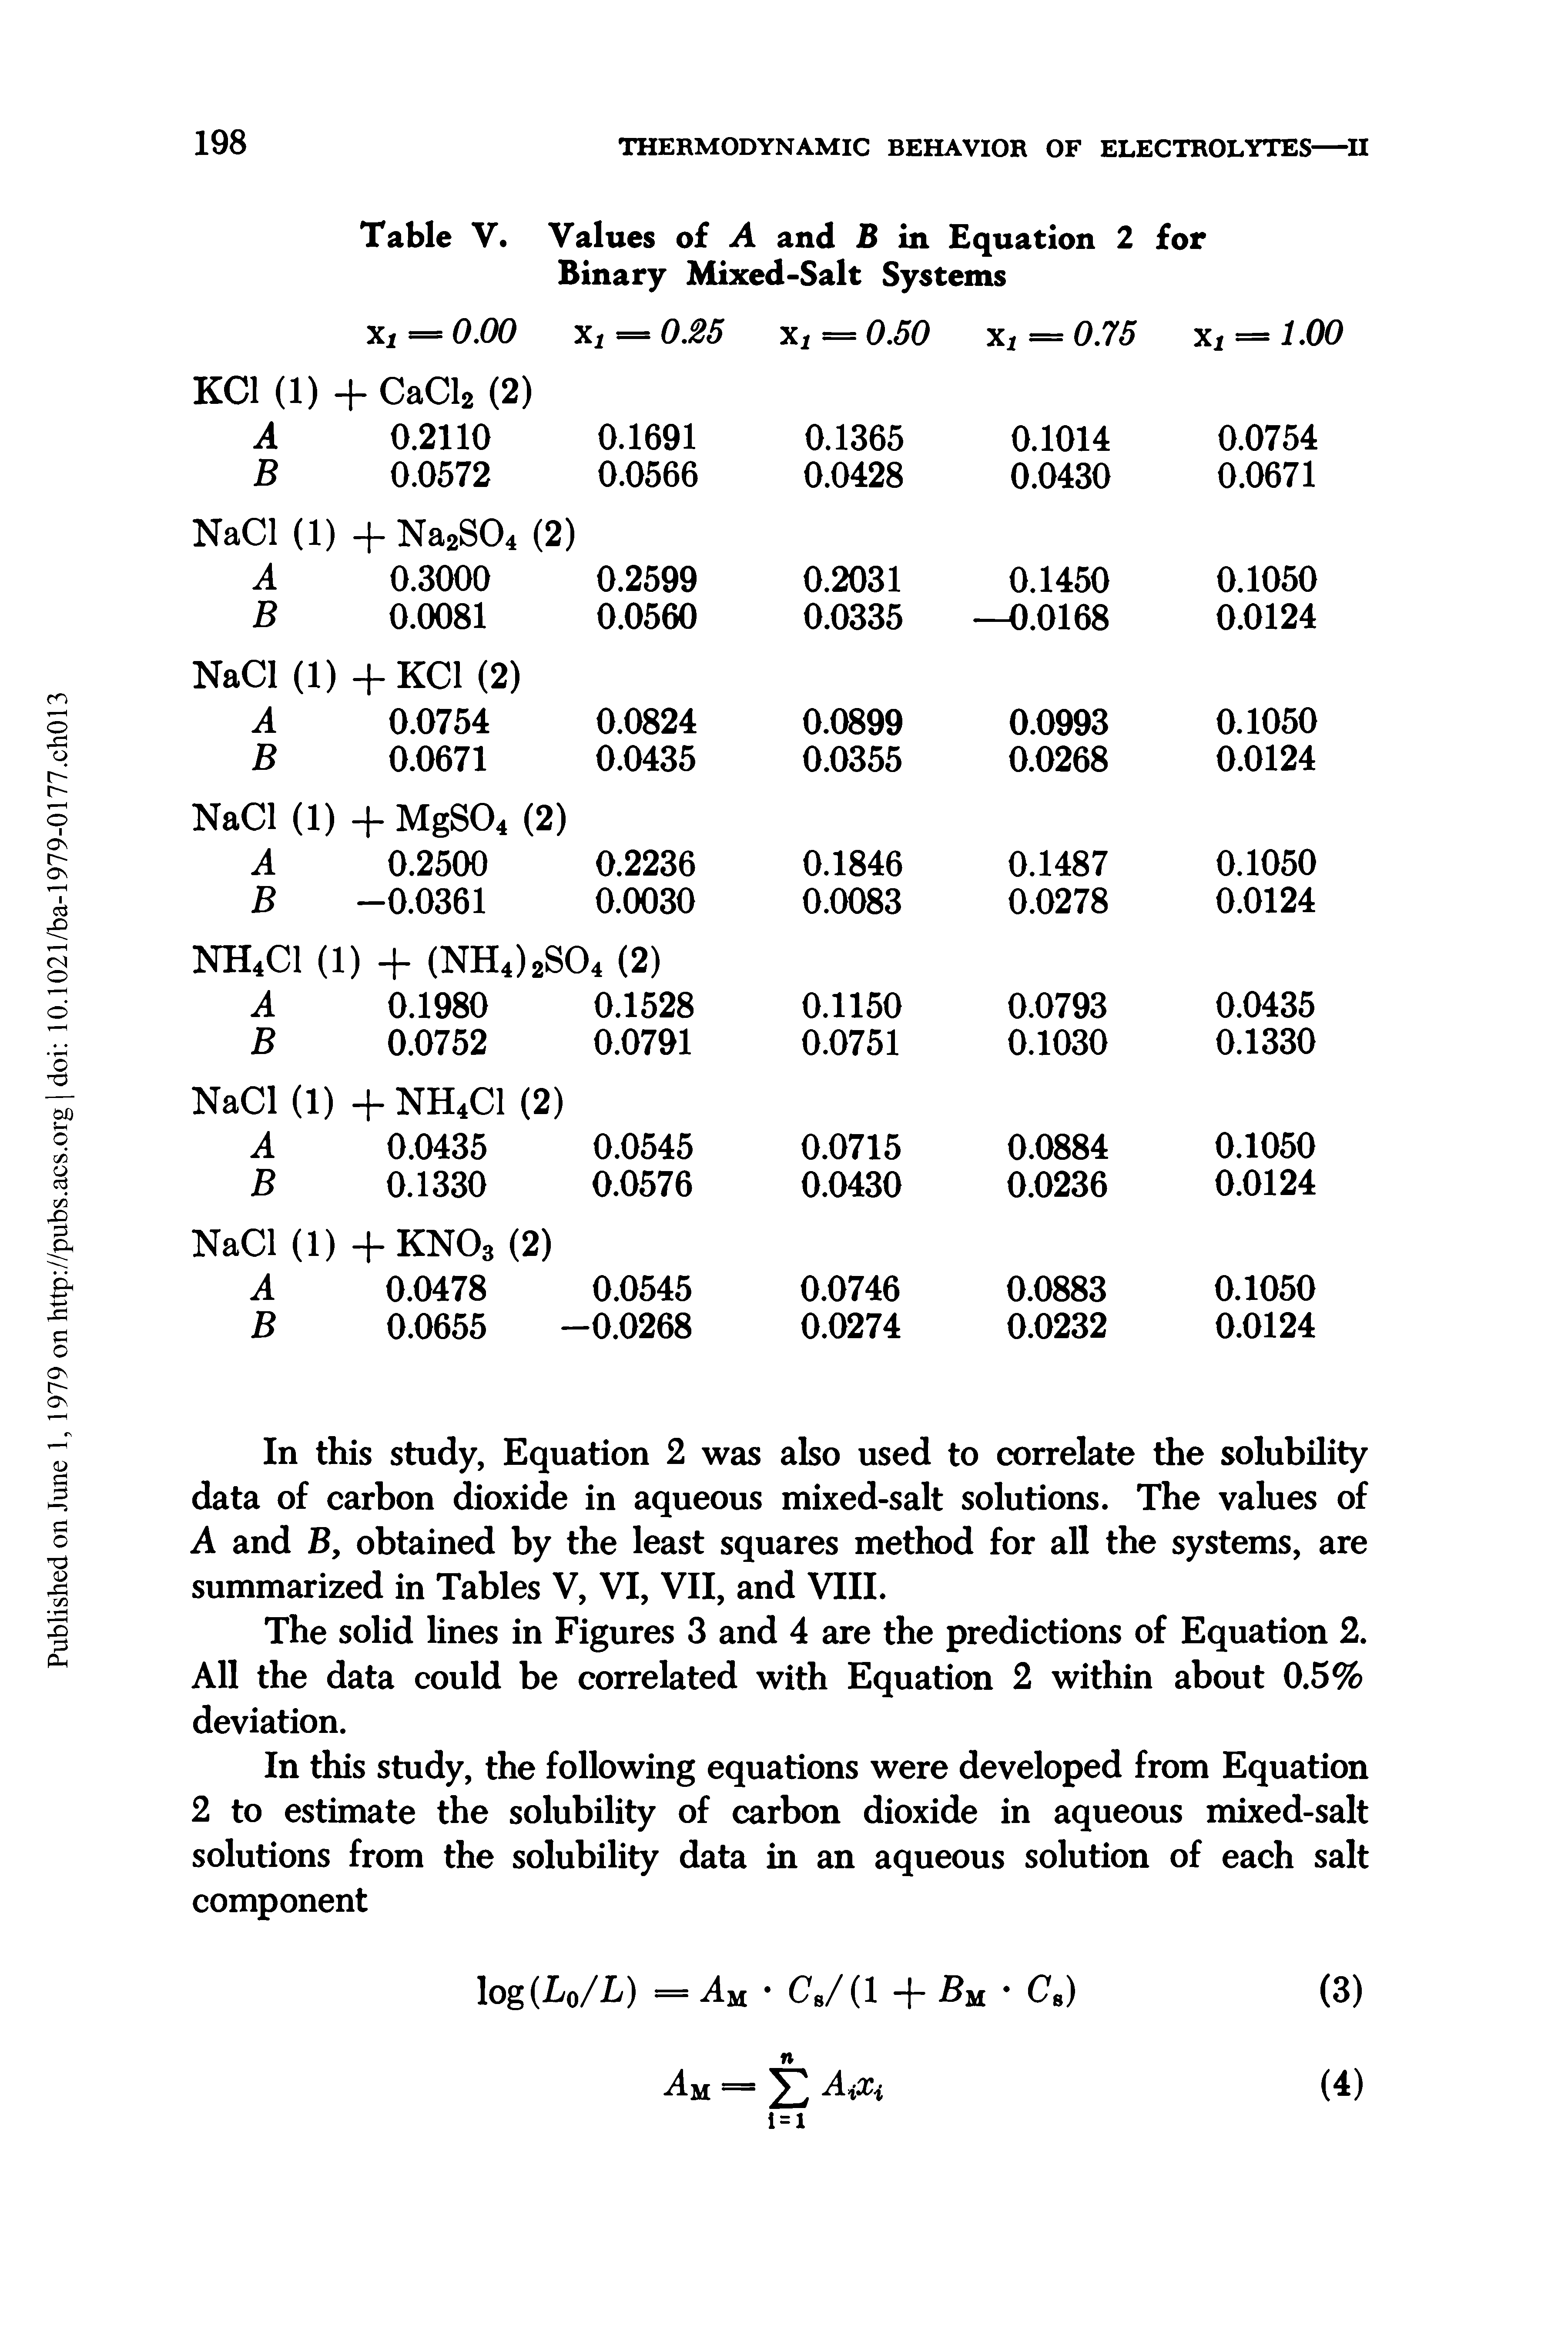 Table V. Values of A and B in Equation 2 for Binary Mixed-Salt Systems...